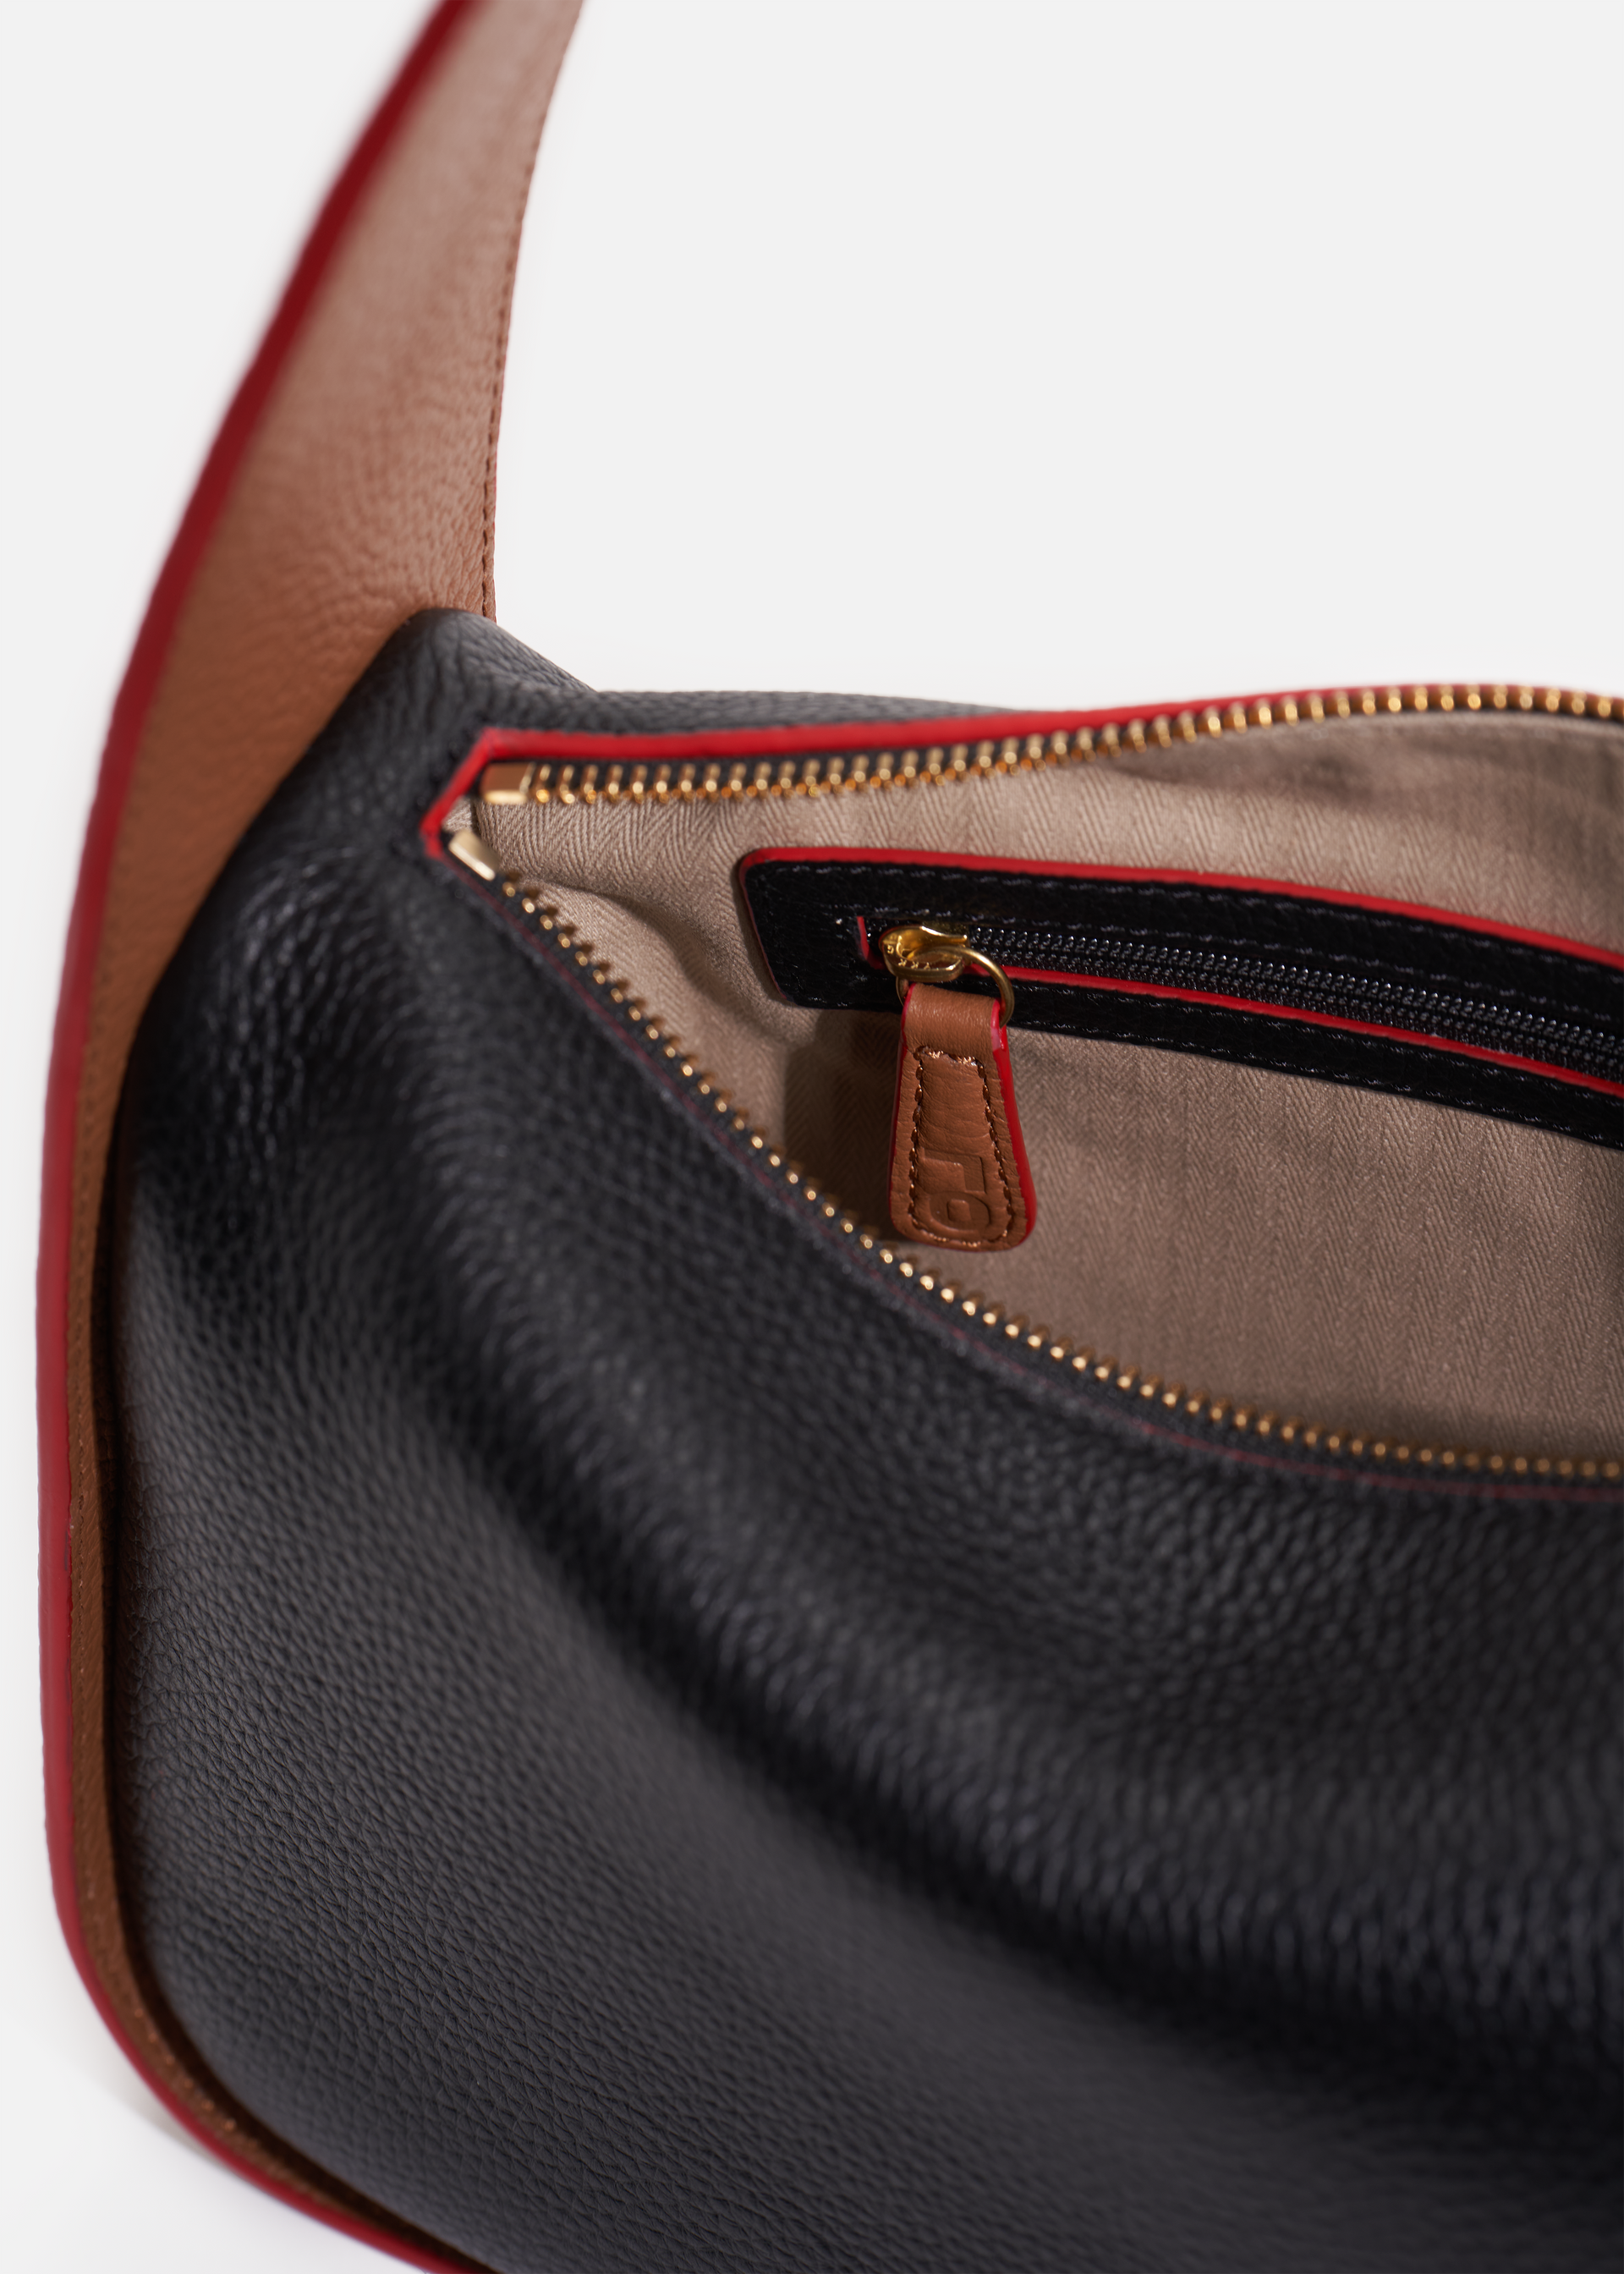 Grete pebble leather shoulder bag in black / caramel with red edge paint